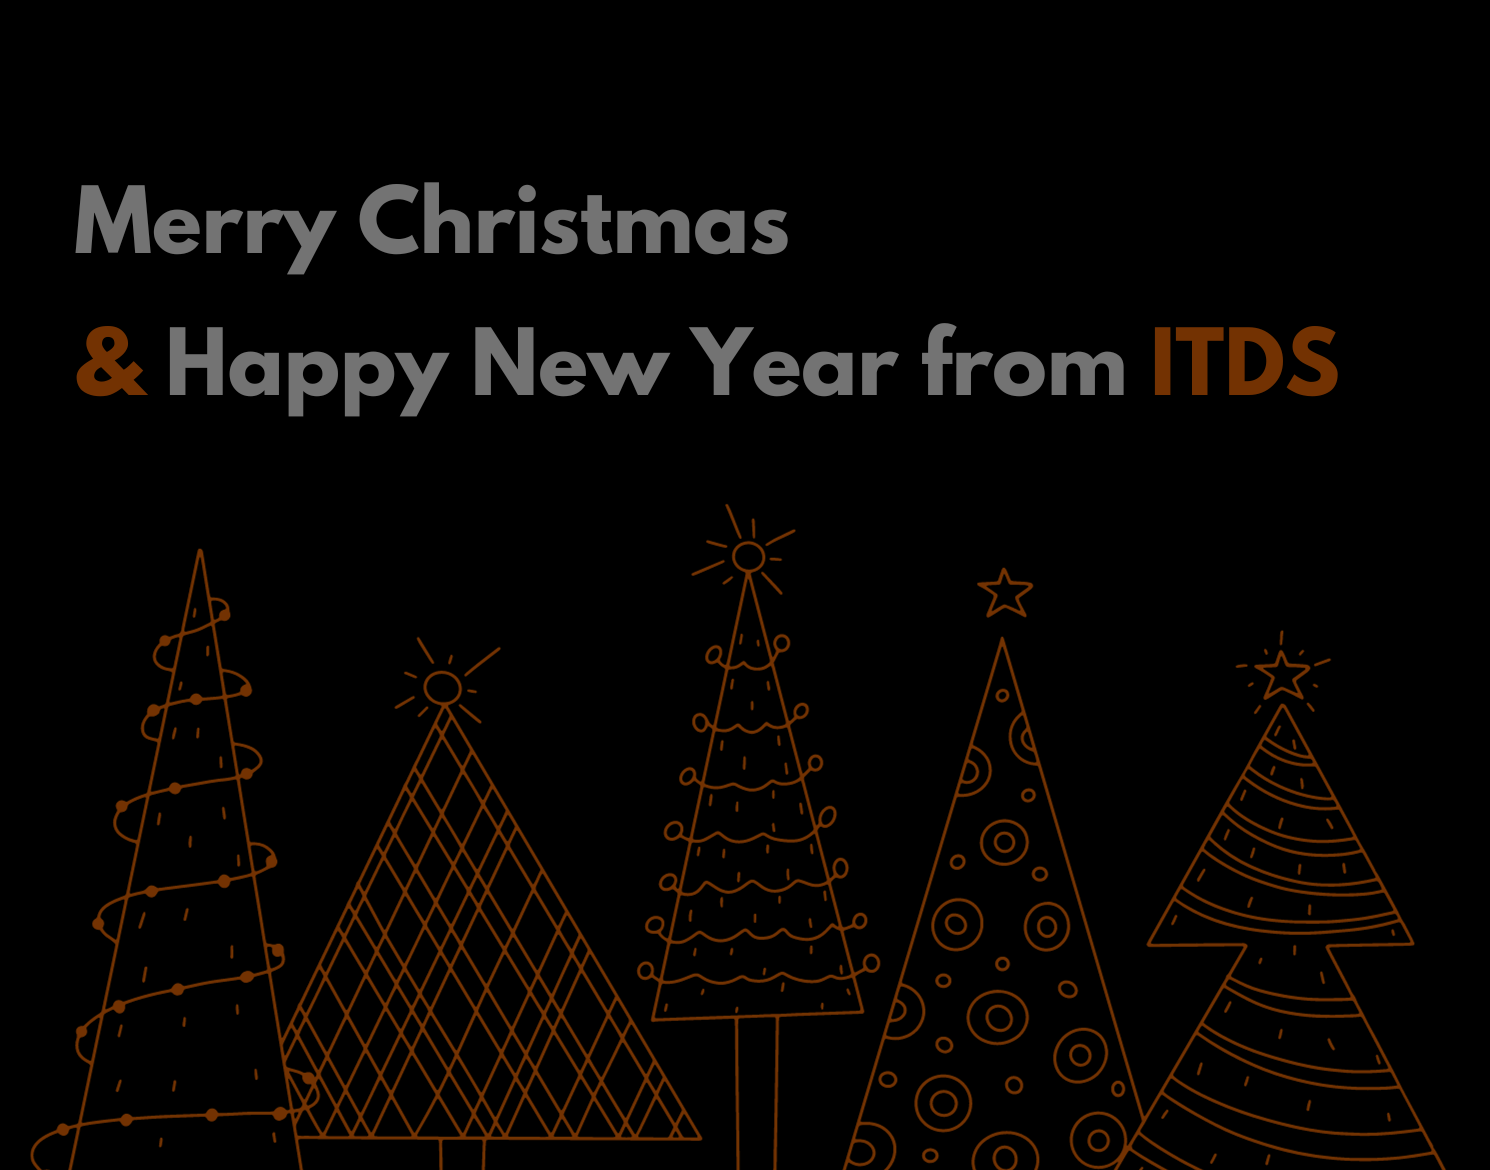 Best wishes from ITDS!